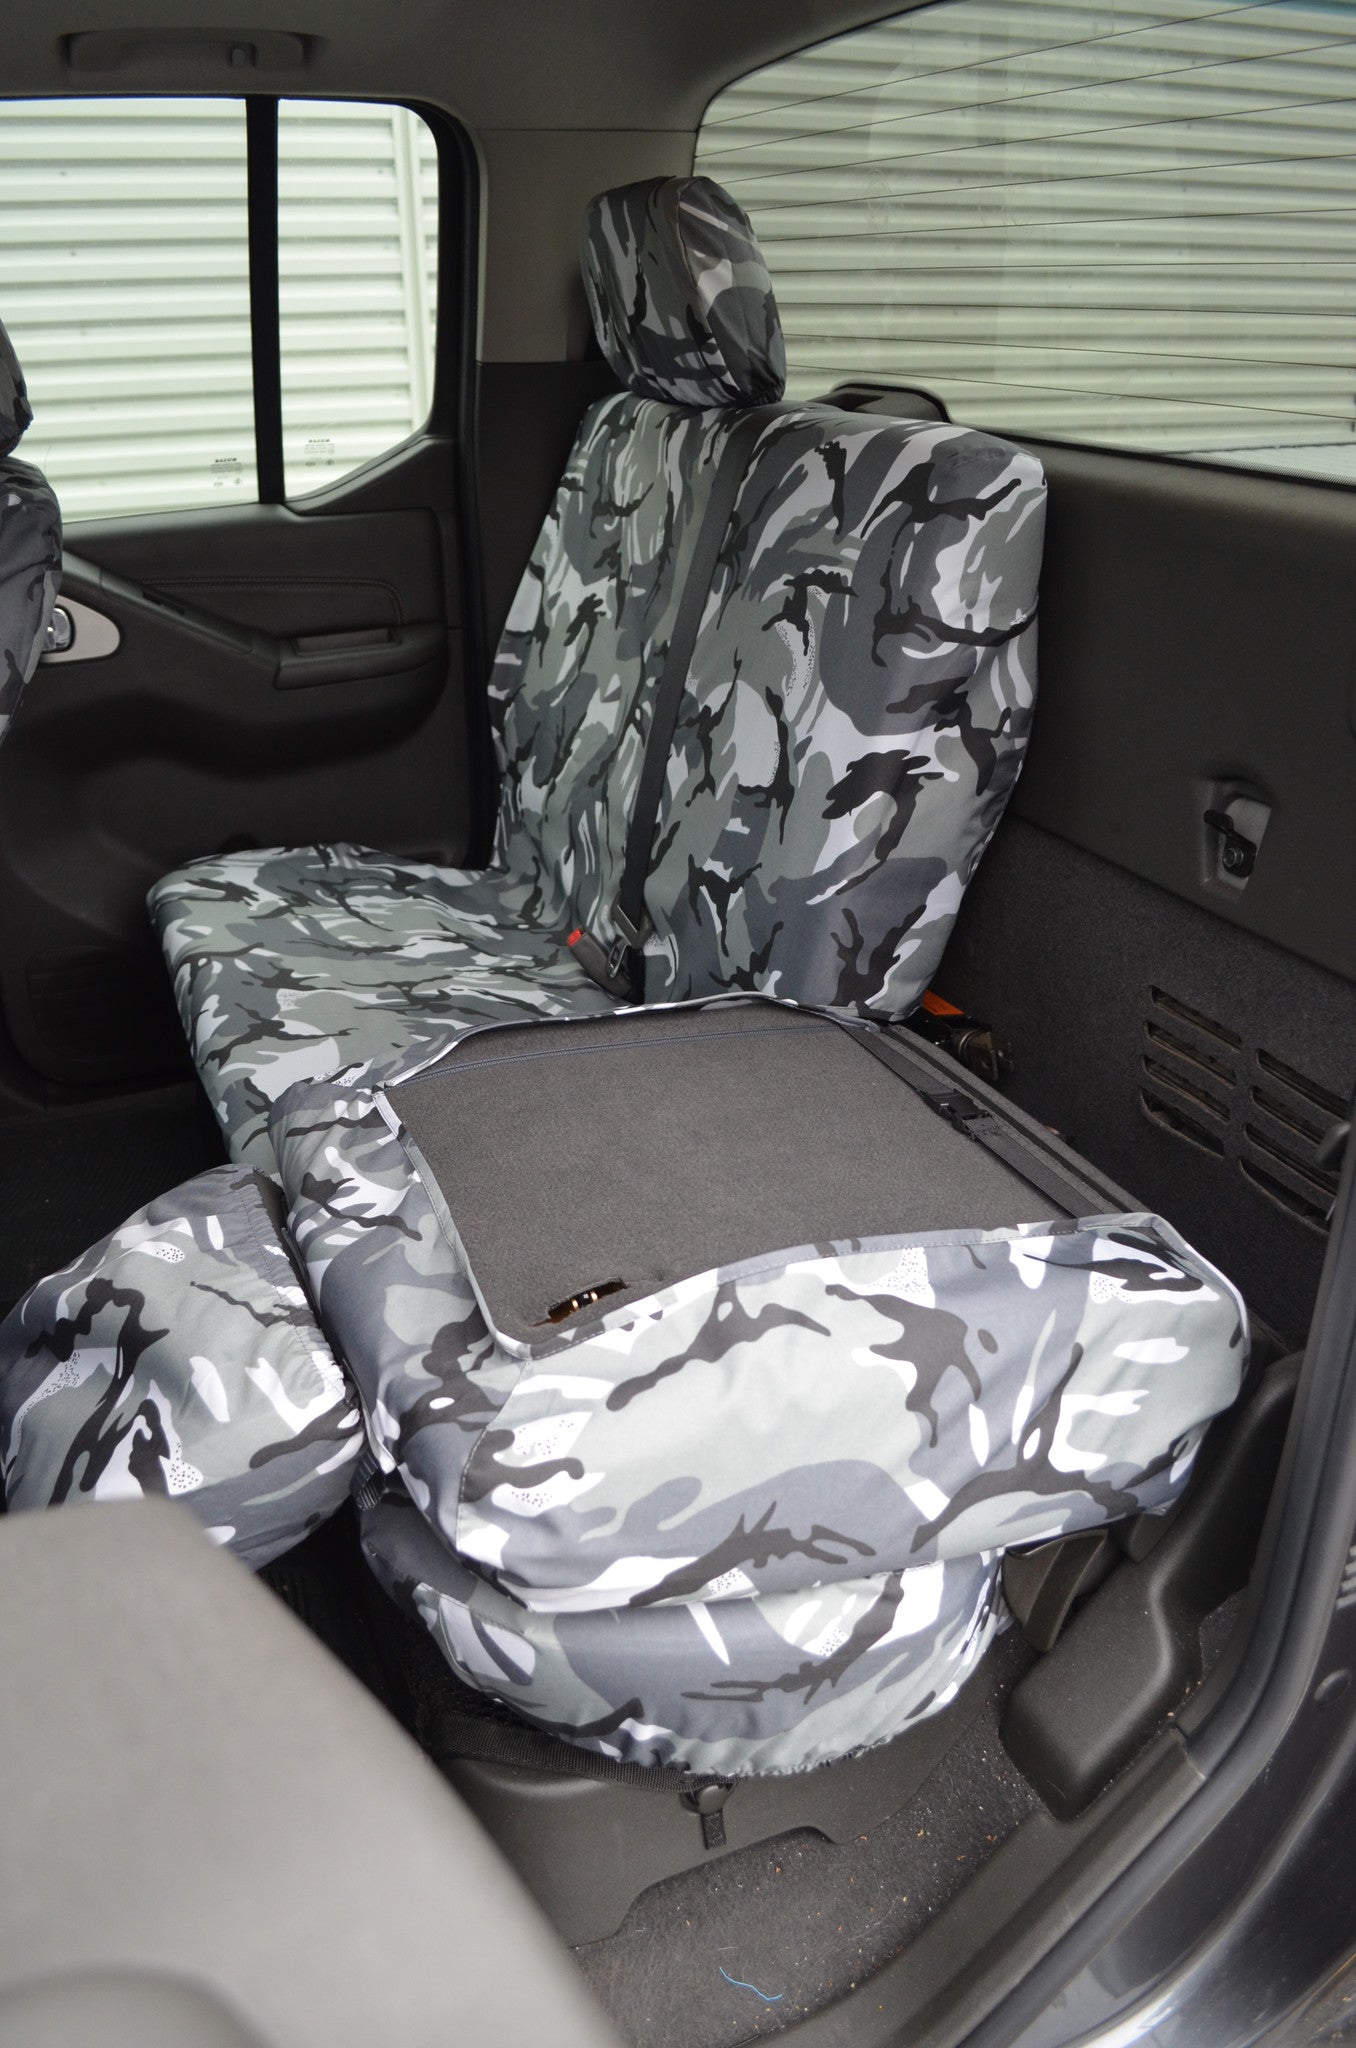 Nissan Navara Double Cab (2005 to 2016) Tailored Seat Covers  Turtle Covers Ltd